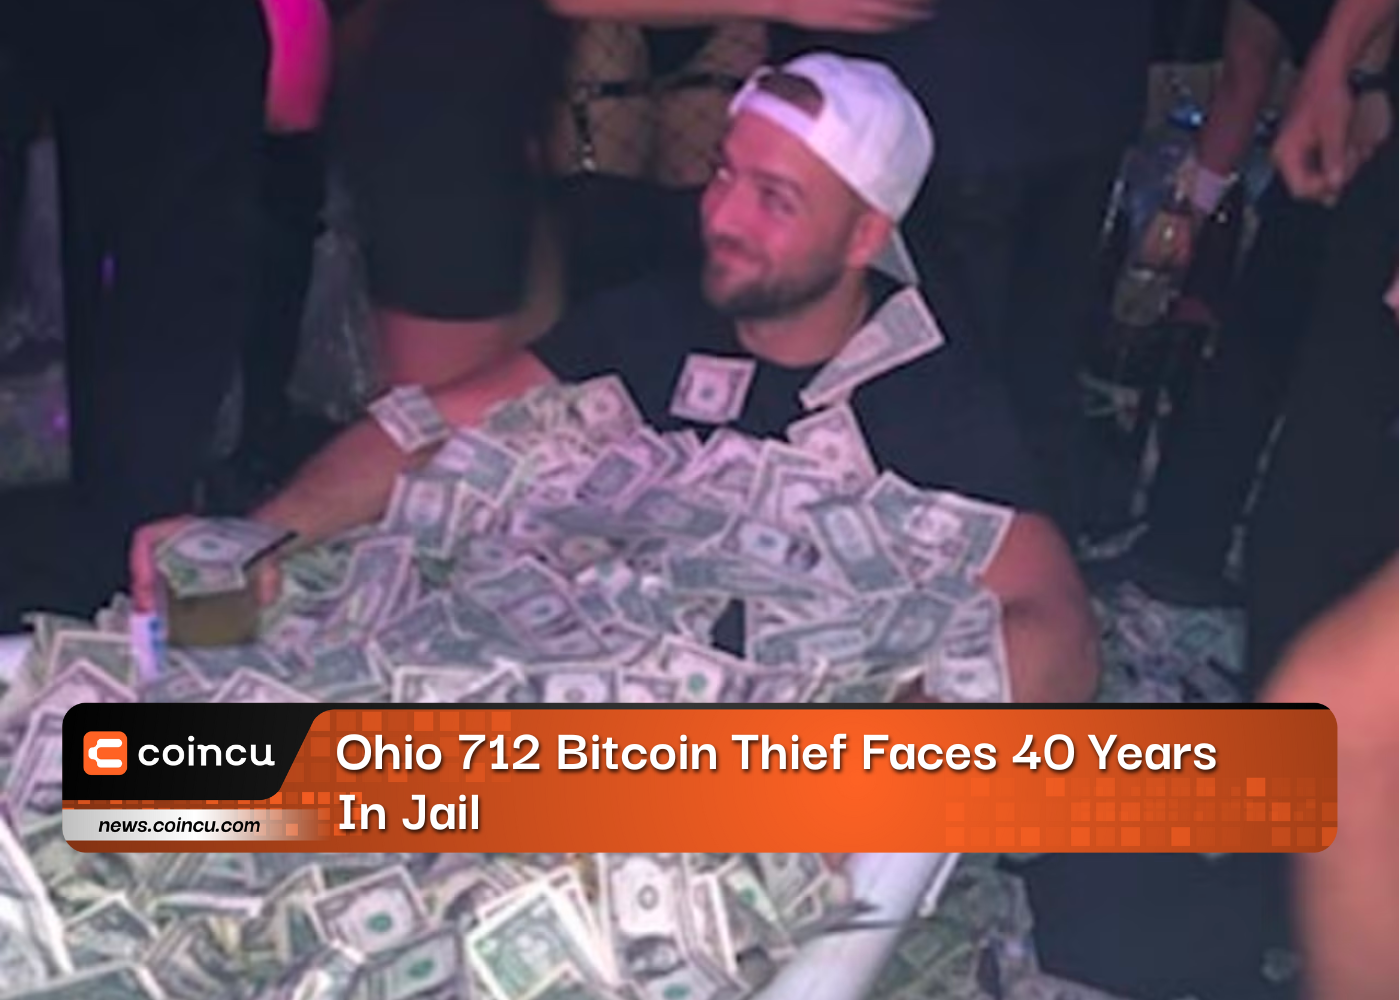 Ohio 712 Bitcoin Thief Faces 40 Years In Jail